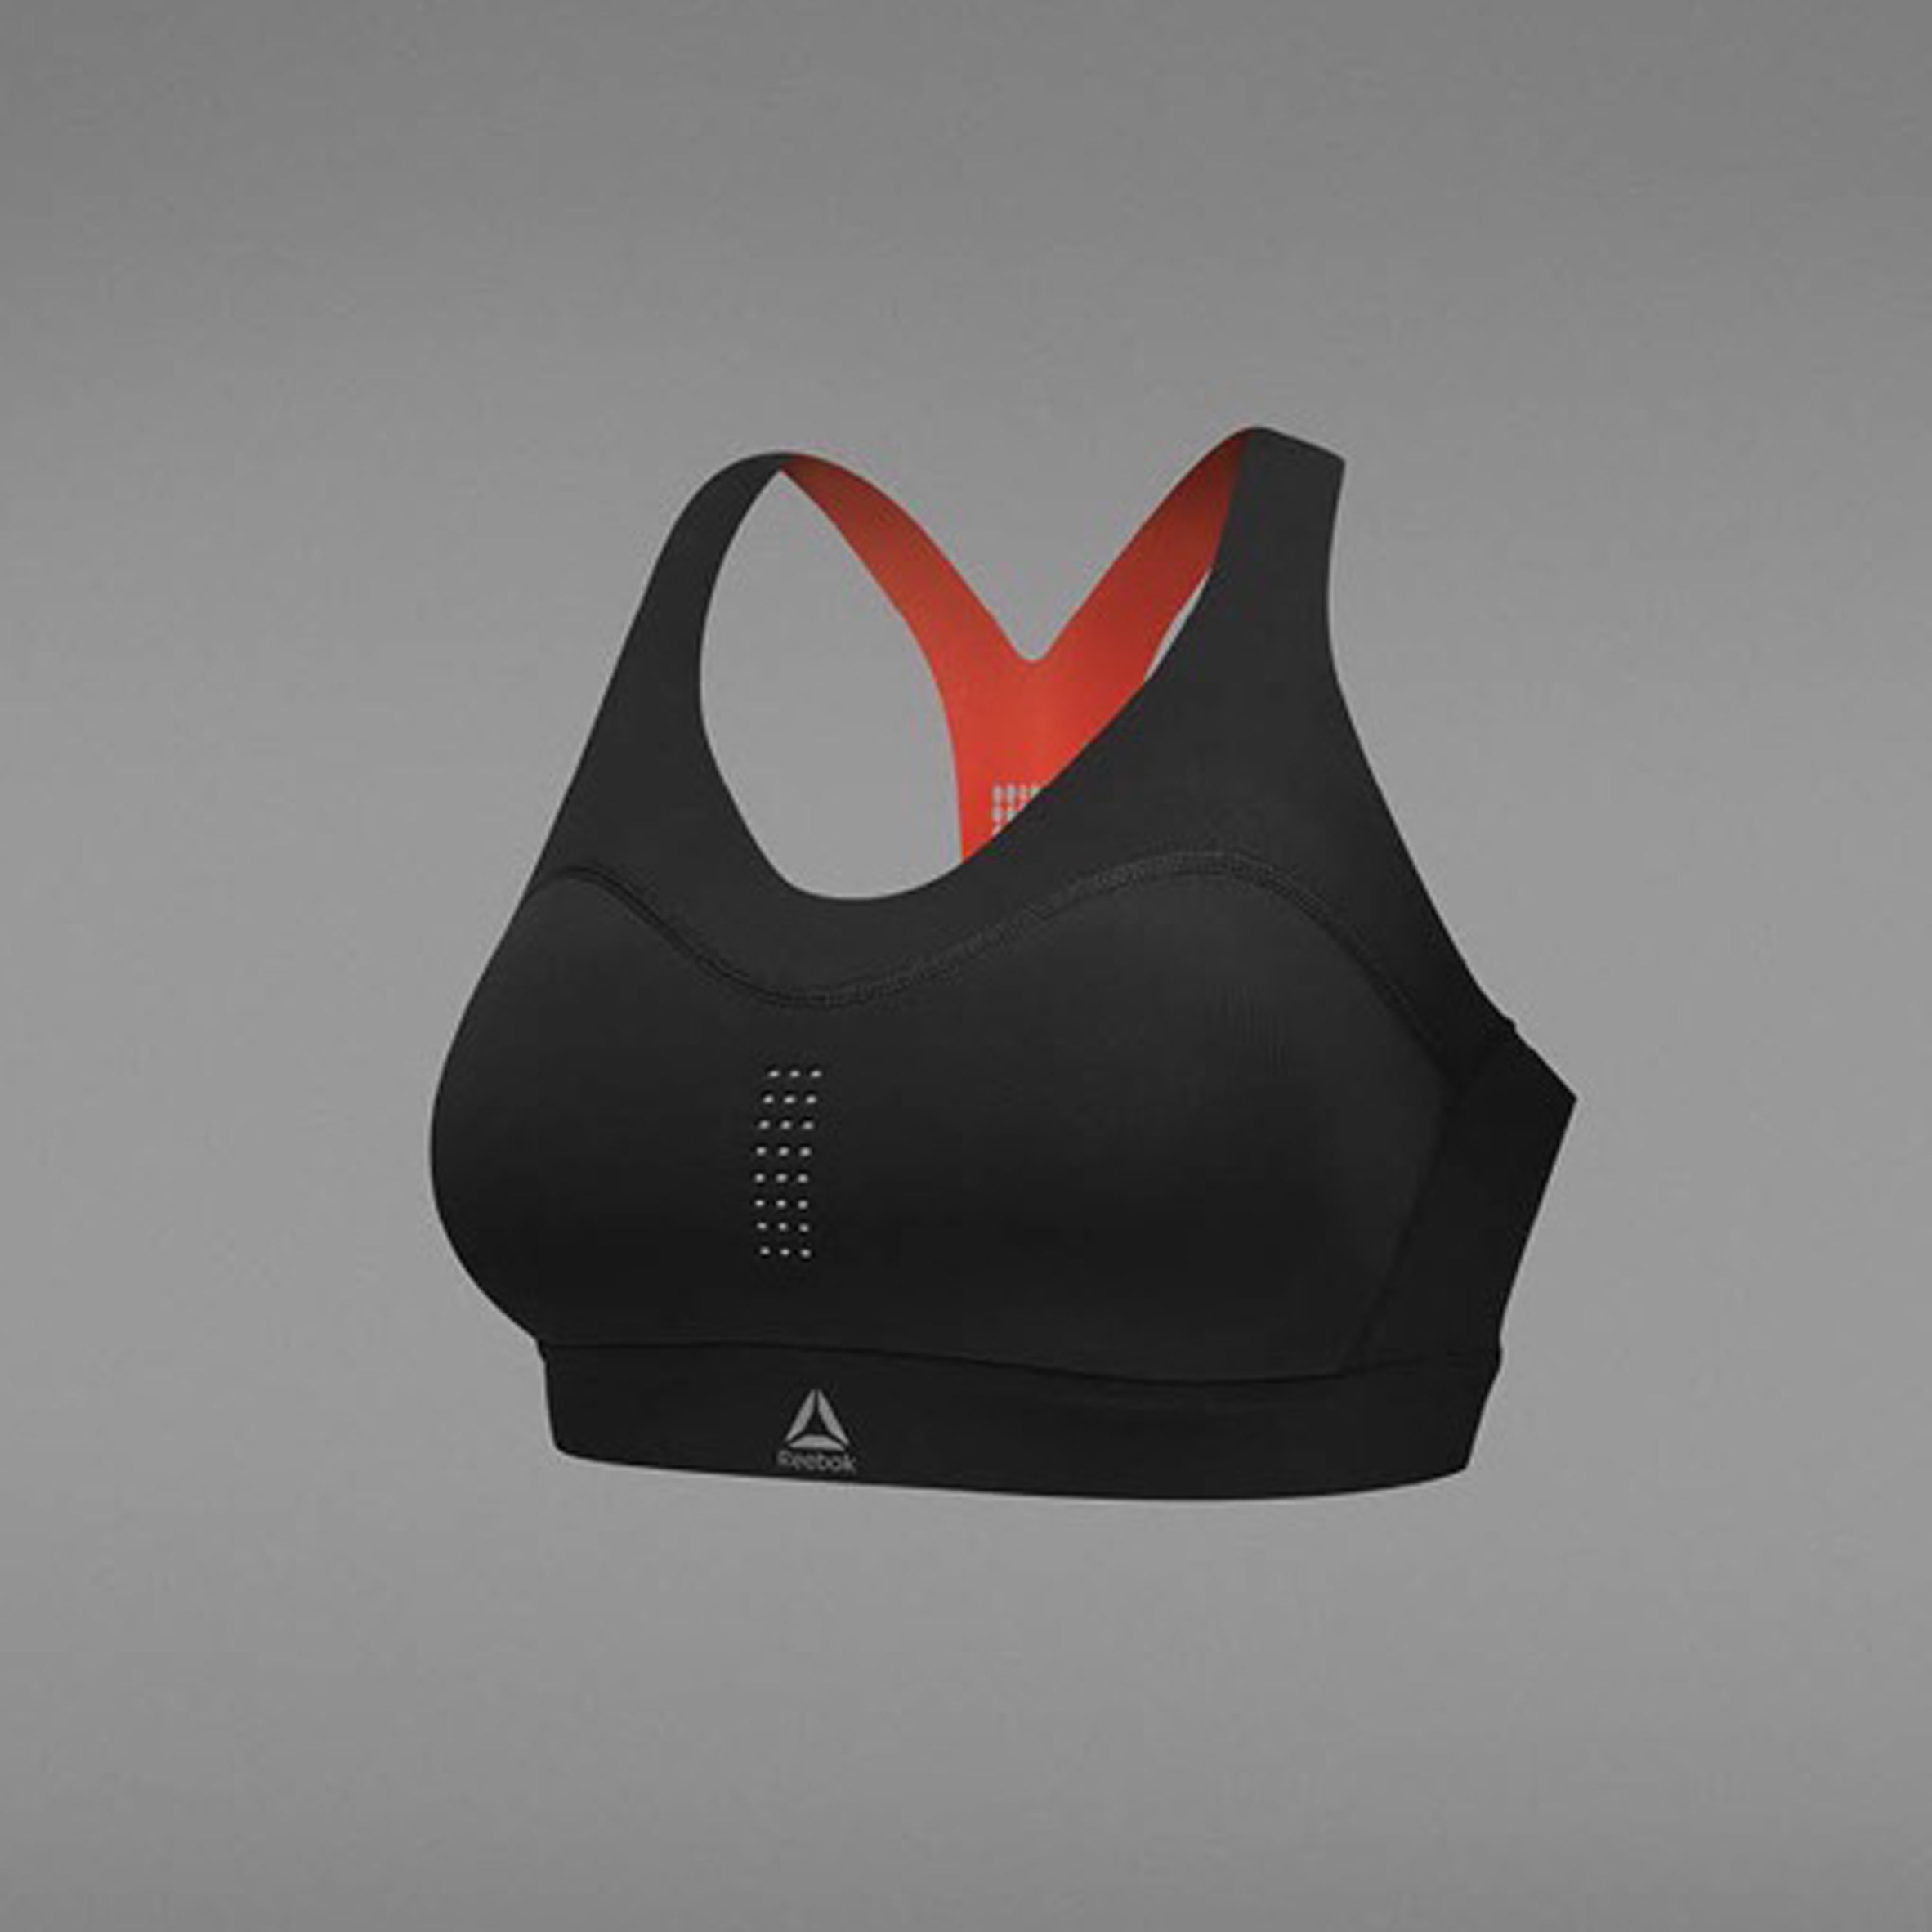 Reebok's gel-infused PureMove bra firms up movement